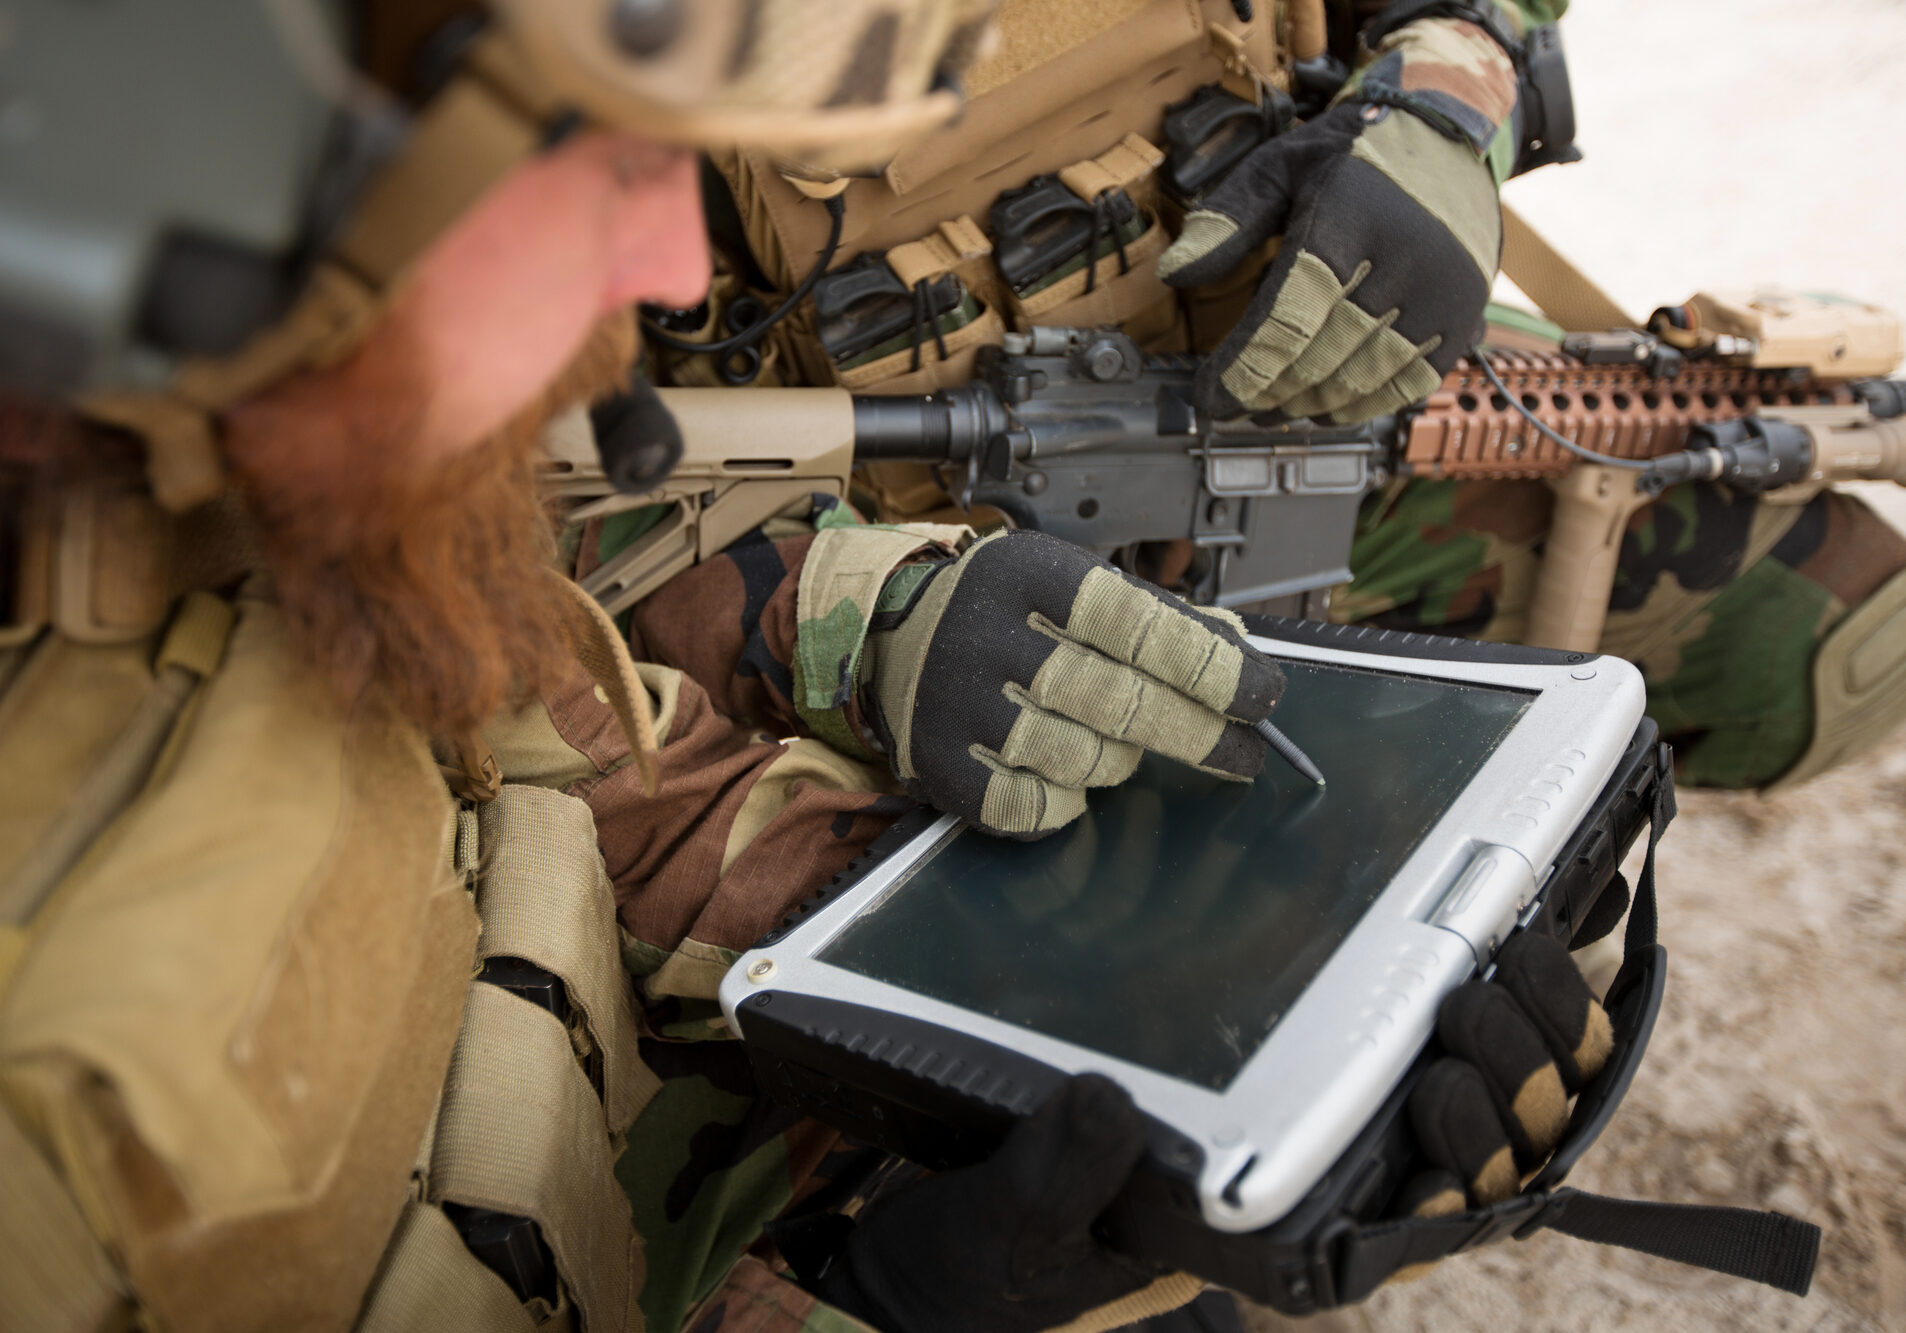 commander of the Rangers paves the route on an electronic tablet